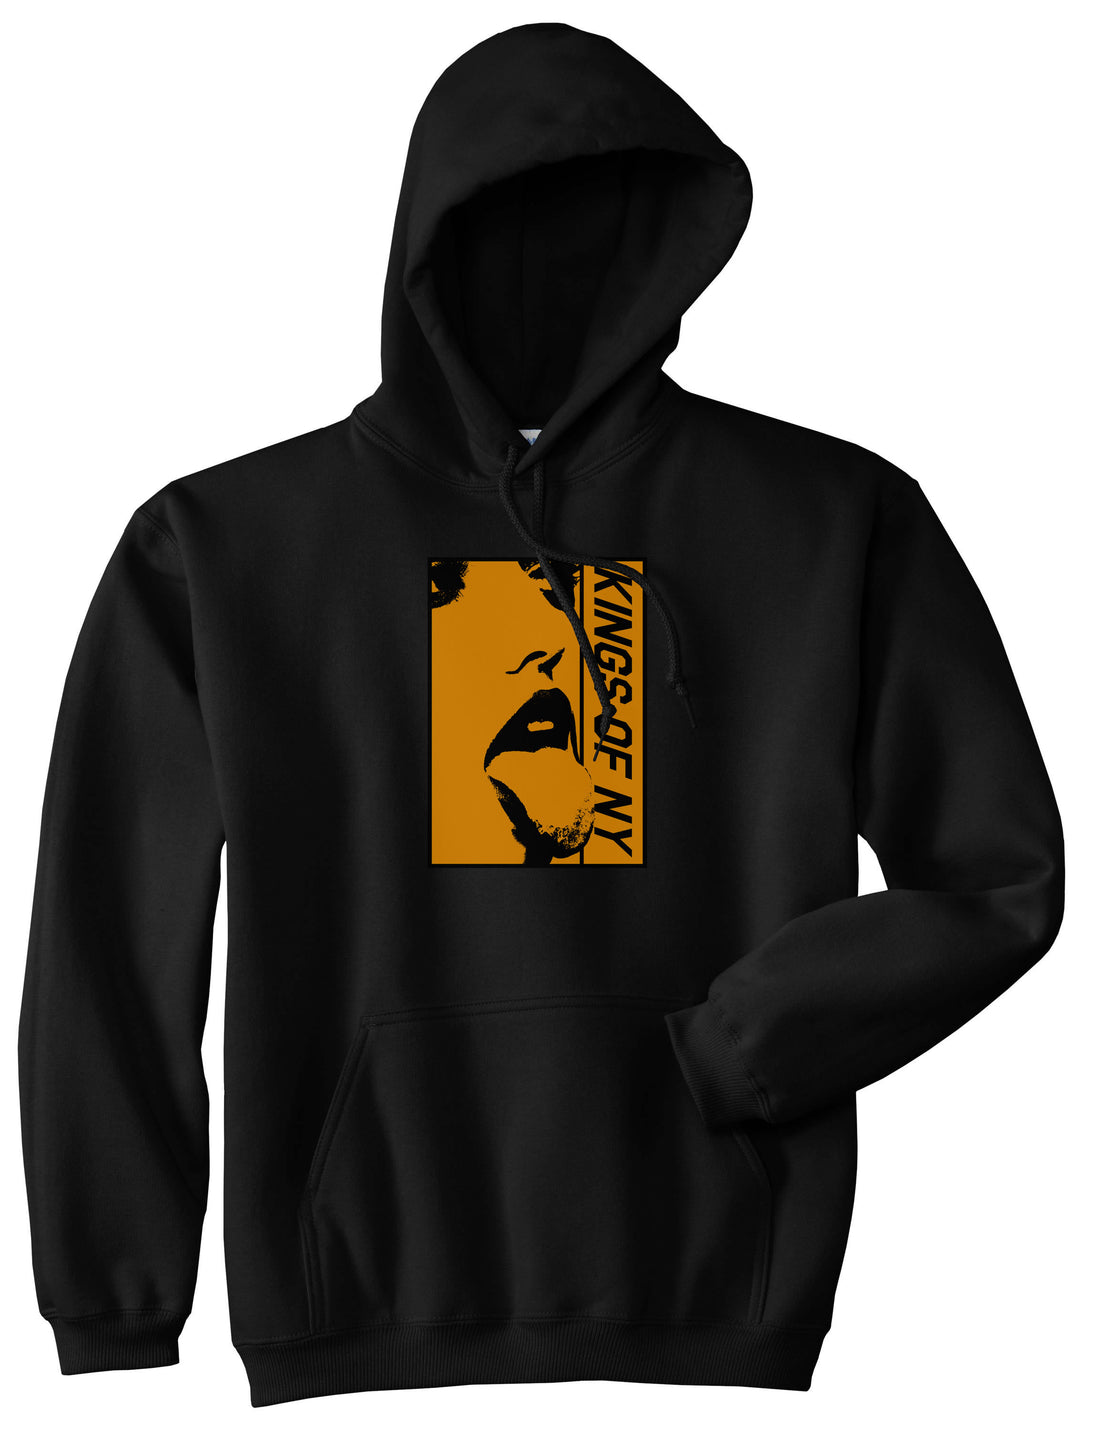 Open Minded Mens Pullover Hoodie Black